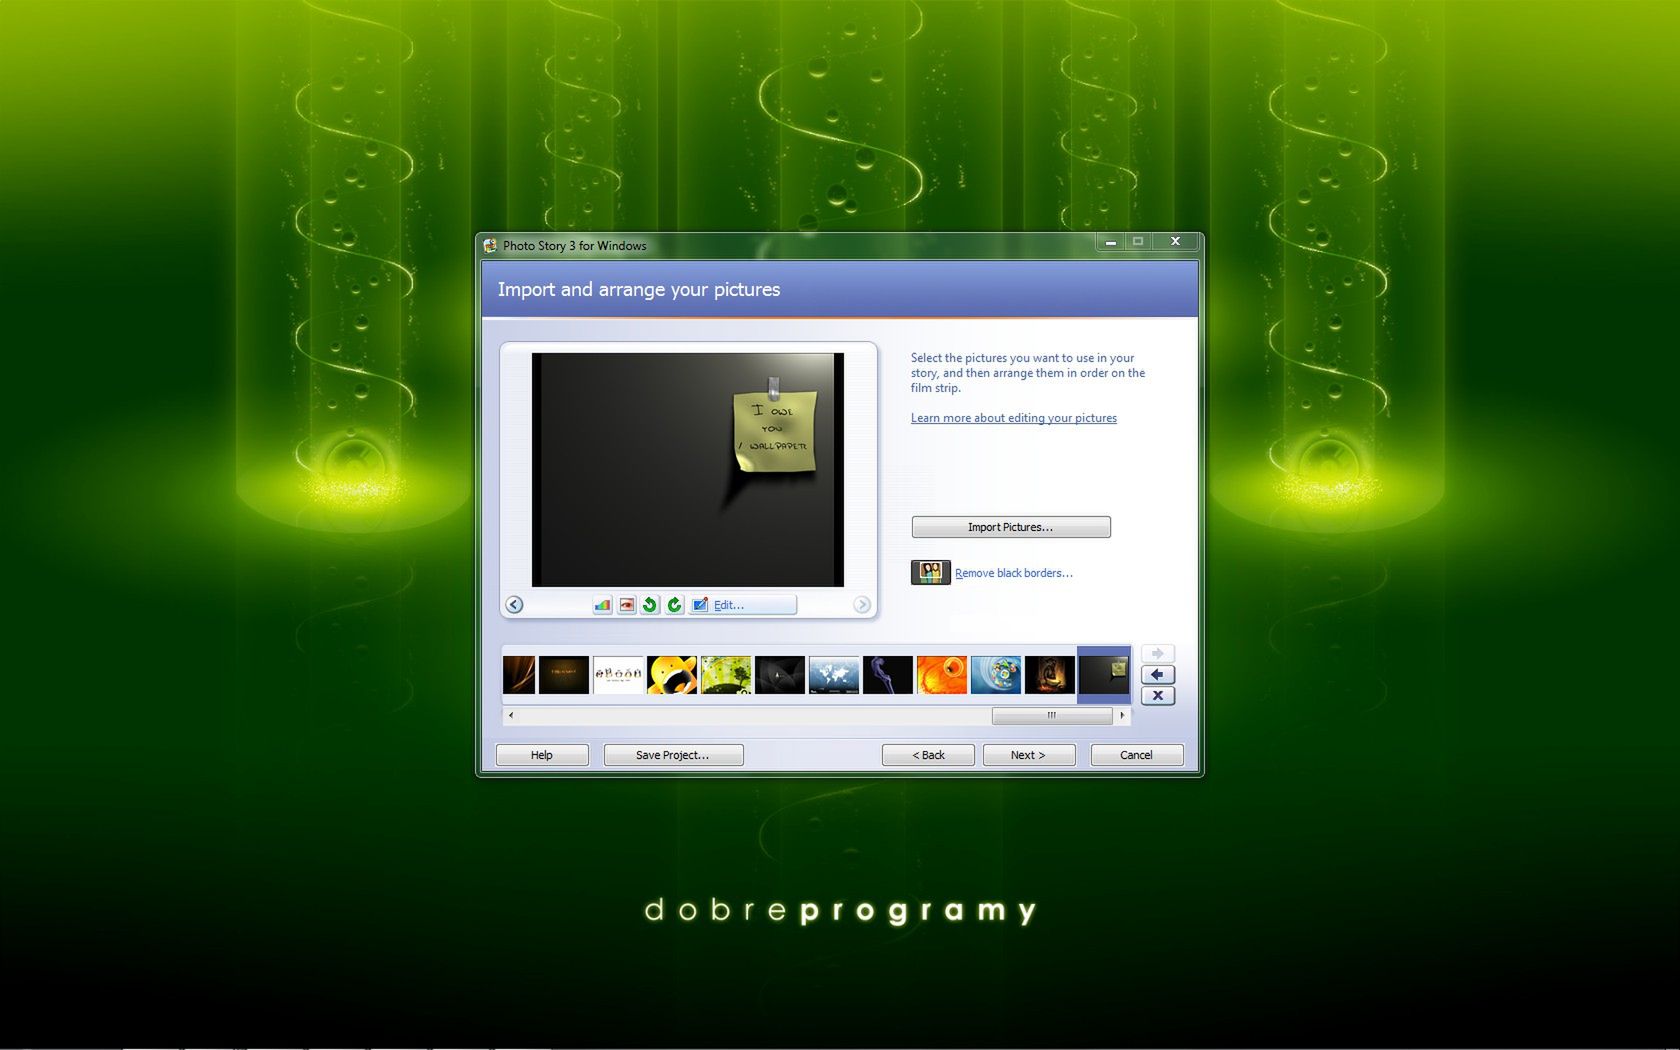 download photostory 3 for windows 7